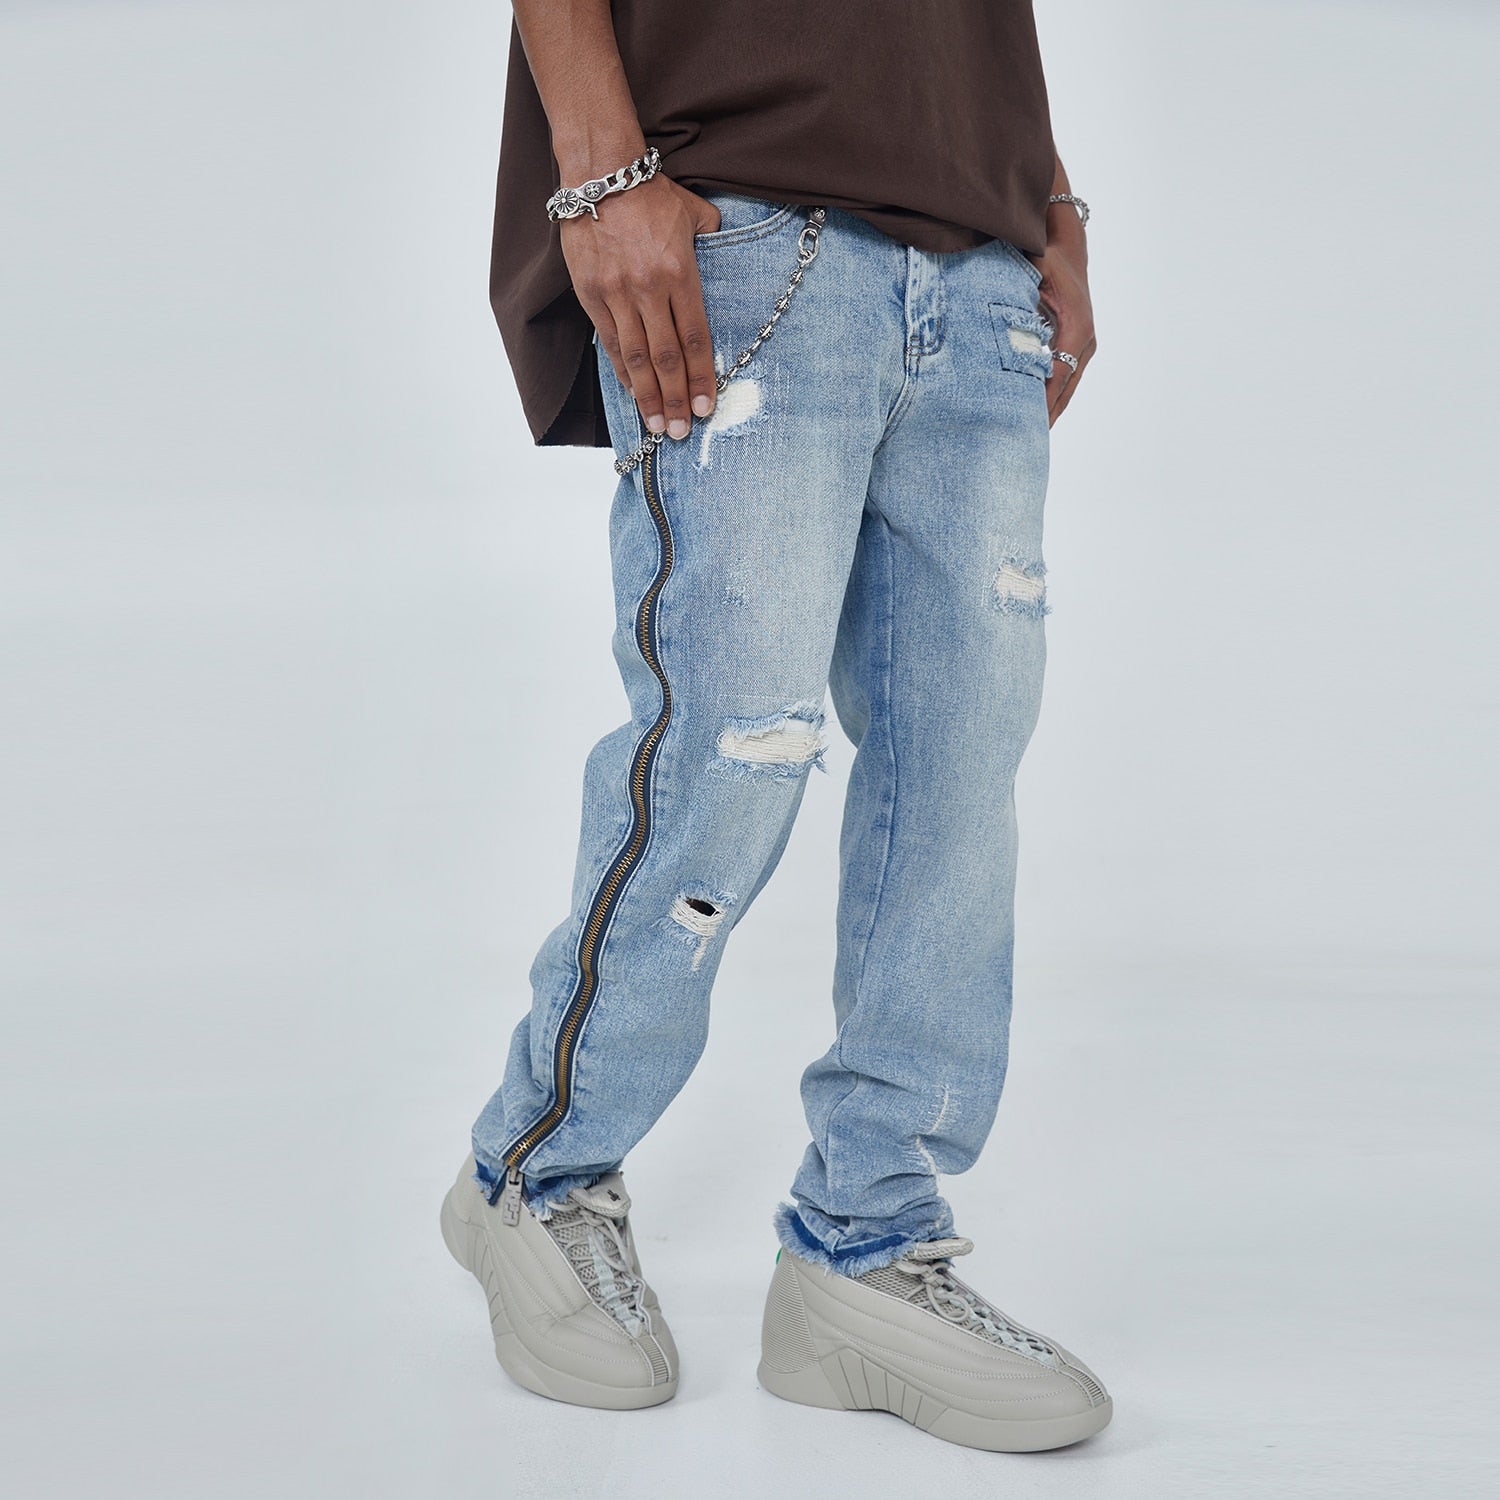 69 Distressed Ripped Jeans